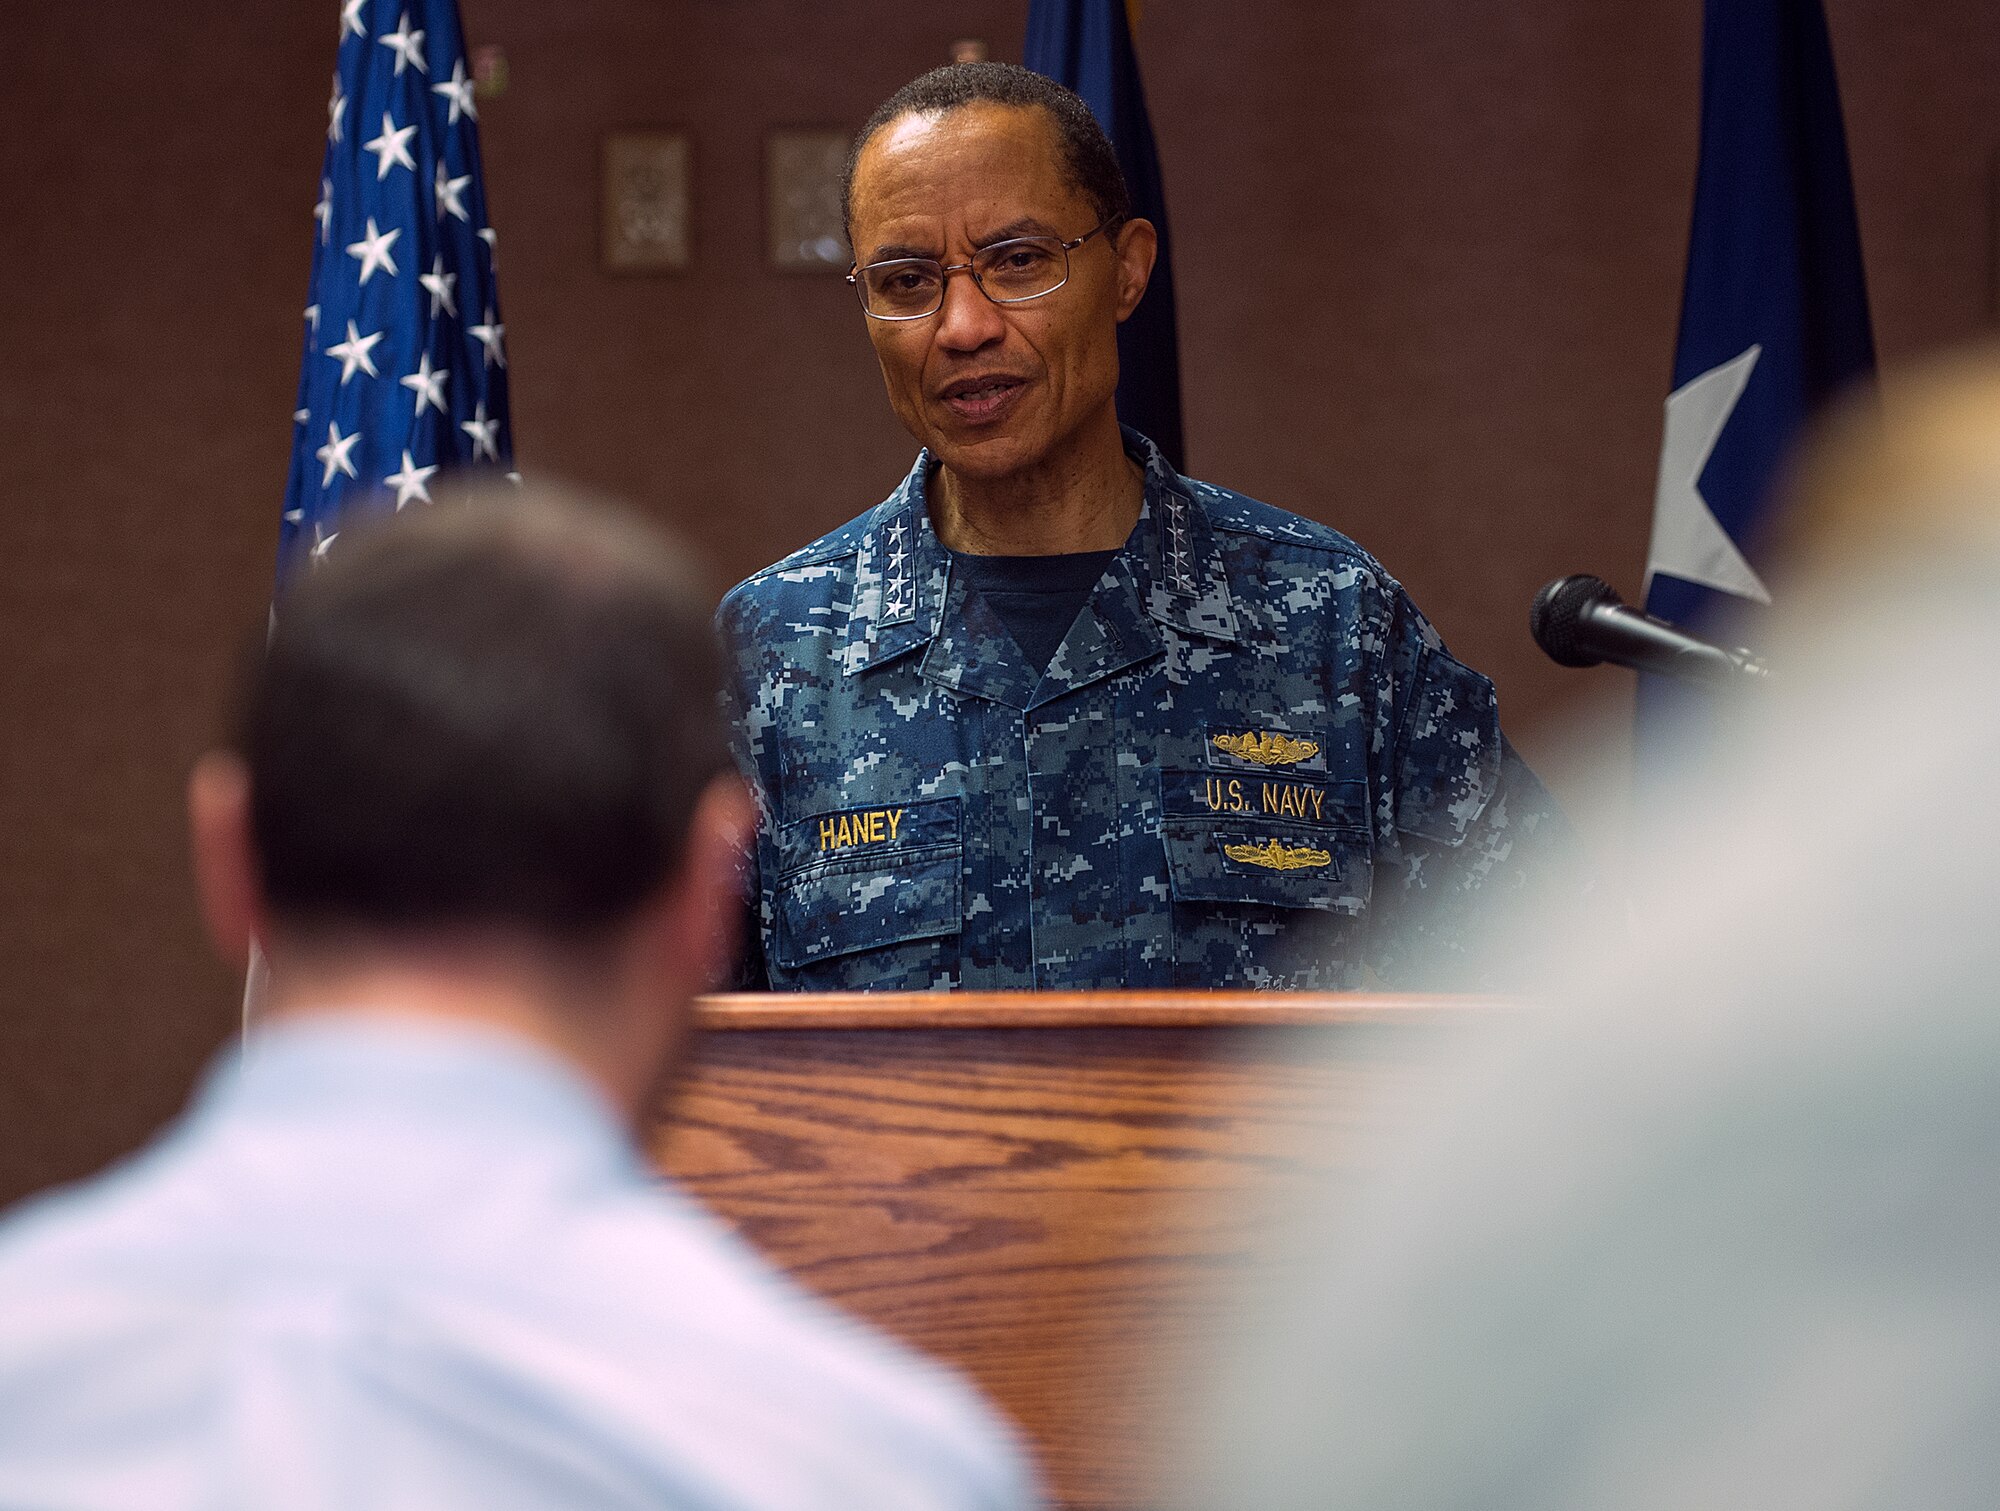 U.S. Navy Adm. Cecil Haney, U.S. Strategic Command commander, speaks with local media during a visit to F.E. Warren Air Force Base, Wyo., April, 28, 2015. Haney visited F.E. Warren to see firsthand the men and women performing the ICBM mission 24/7, 365, and to chair the Intercontinental Ballistic Missile Stakeholders meeting, one of several such meetings that will be held this year.  USSTRATCOM is one of nine DoD unified combatant commands and is charged with strategic deterrence; space operations; cyberspace operations; joint electronic warfare; global strike; missile defense; intelligence, surveillance and reconnaissance; combating weapons of mass destruction; and analysis and targeting. (U.S. Air Force photo by R.J. Oriez)